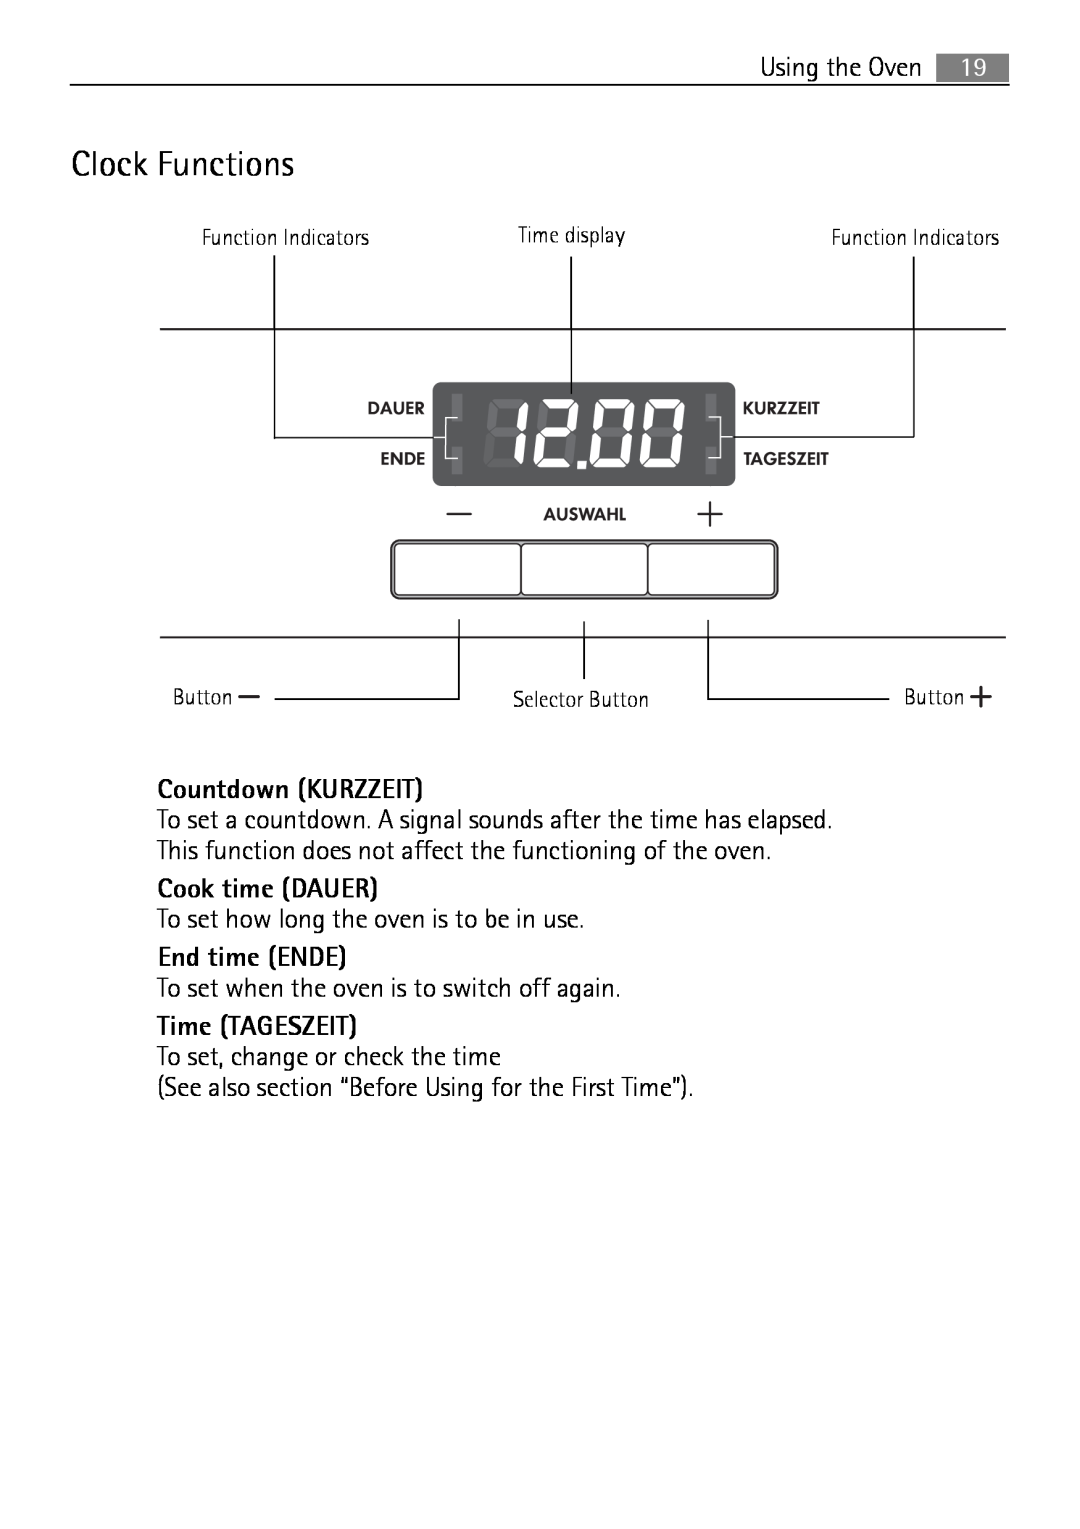 Electrolux E43012-5 user manual Clock Functions, Countdown KURZZEIT, Cook time DAUER, End time ENDE, Time TAGESZEIT 